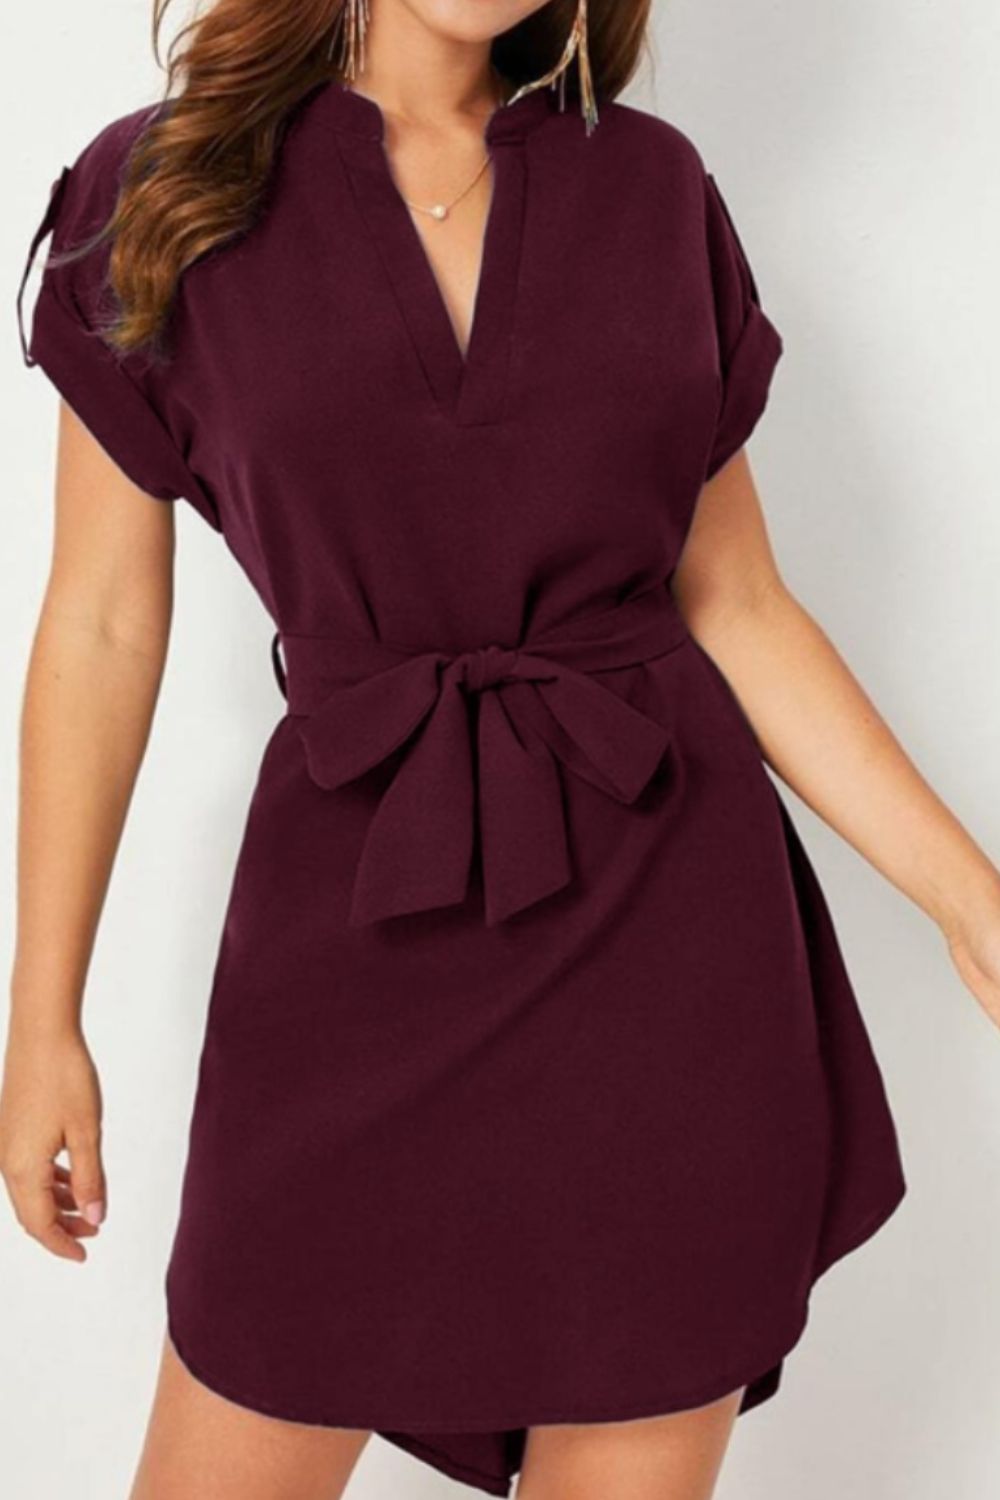 Discover the chic Tied Notched Dress! Flattering tie-waist, versatile style, available in 6 colors. Perfect for any occasion. Shop now!